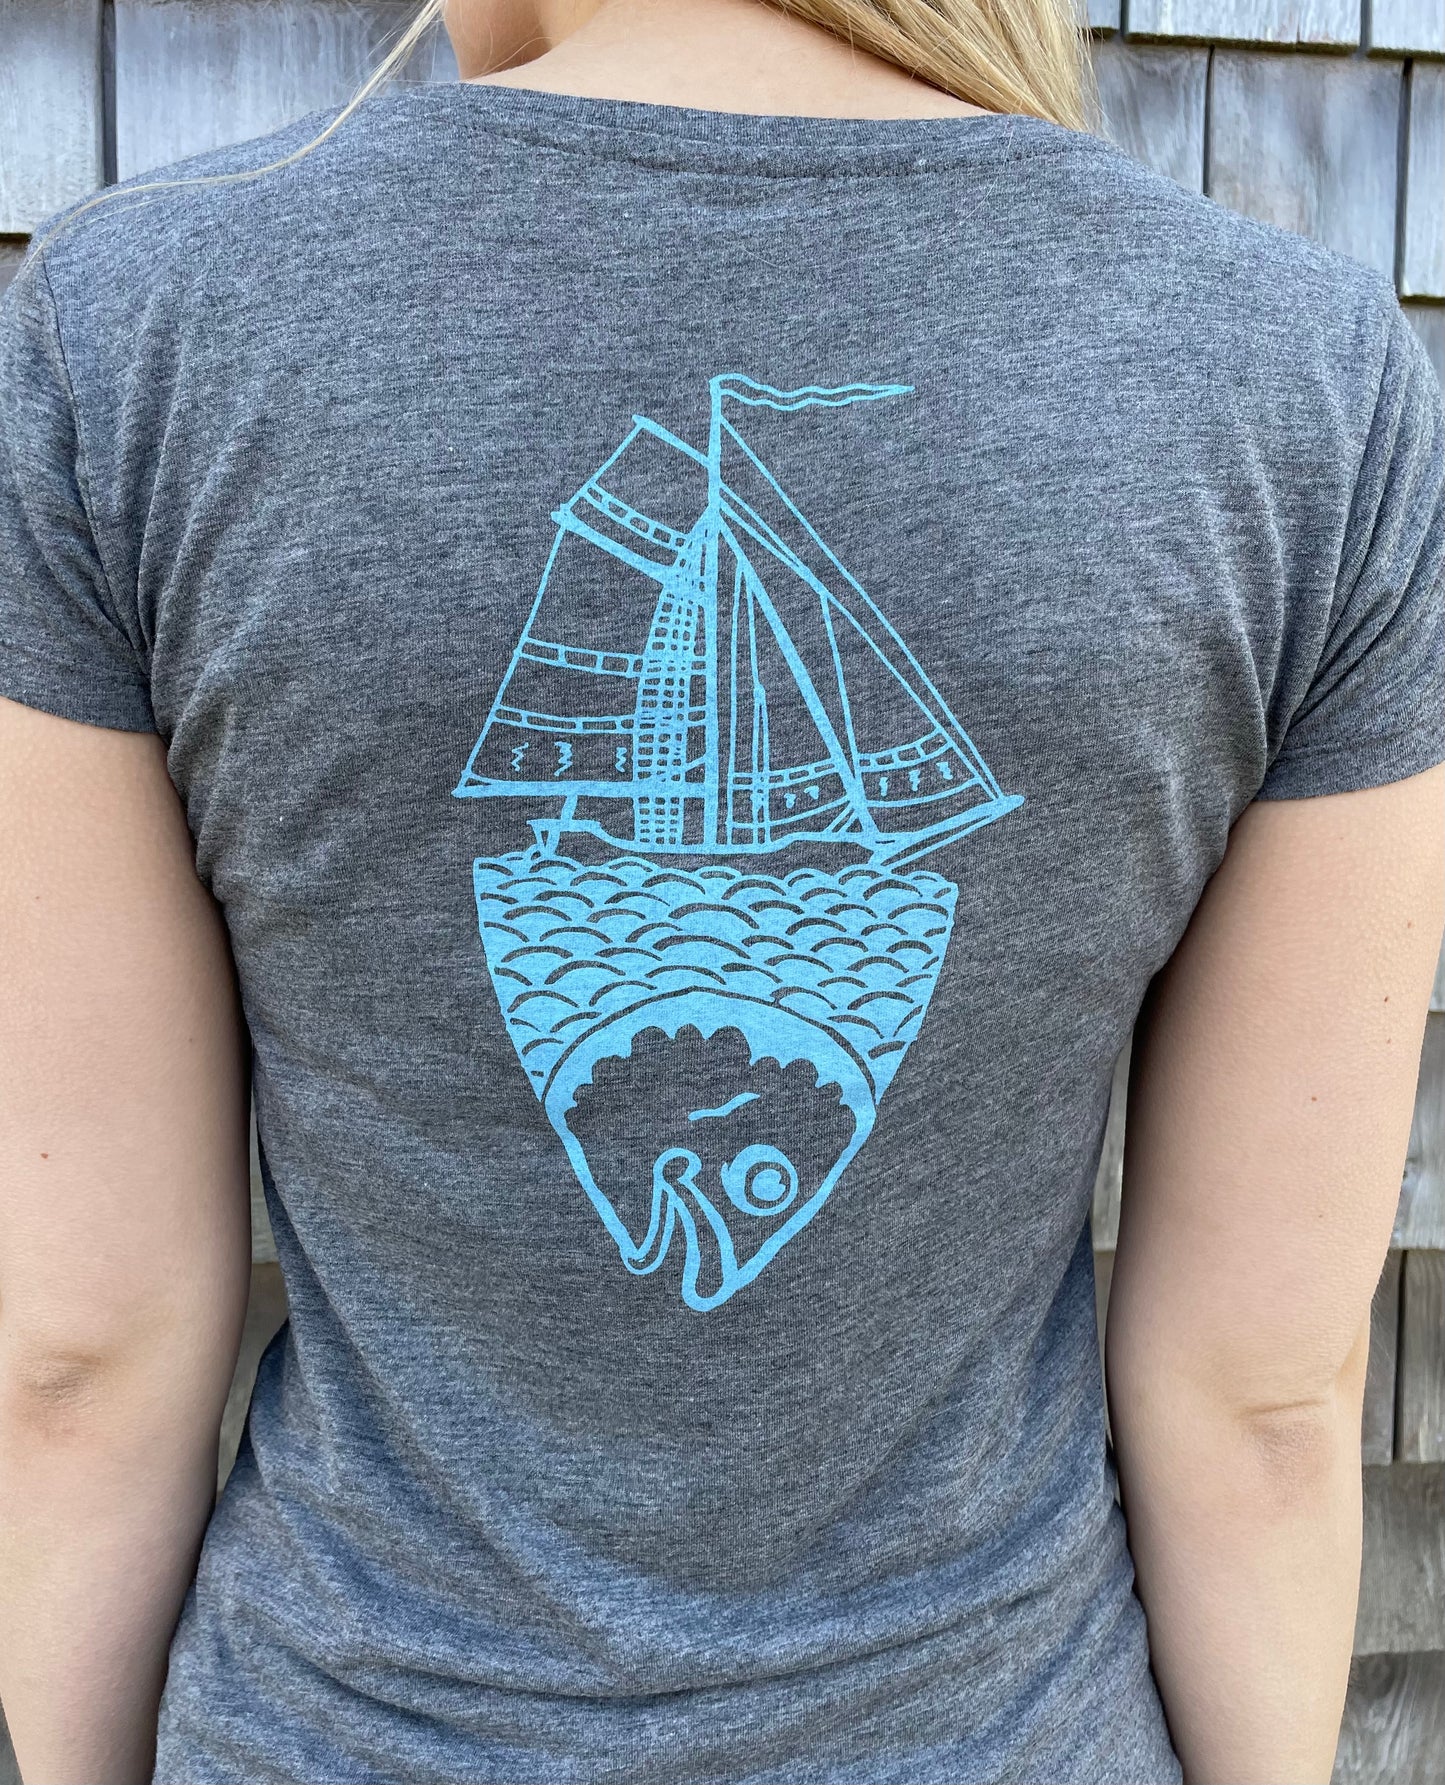 Life Comes in Waves Double Print V-Neck Tee